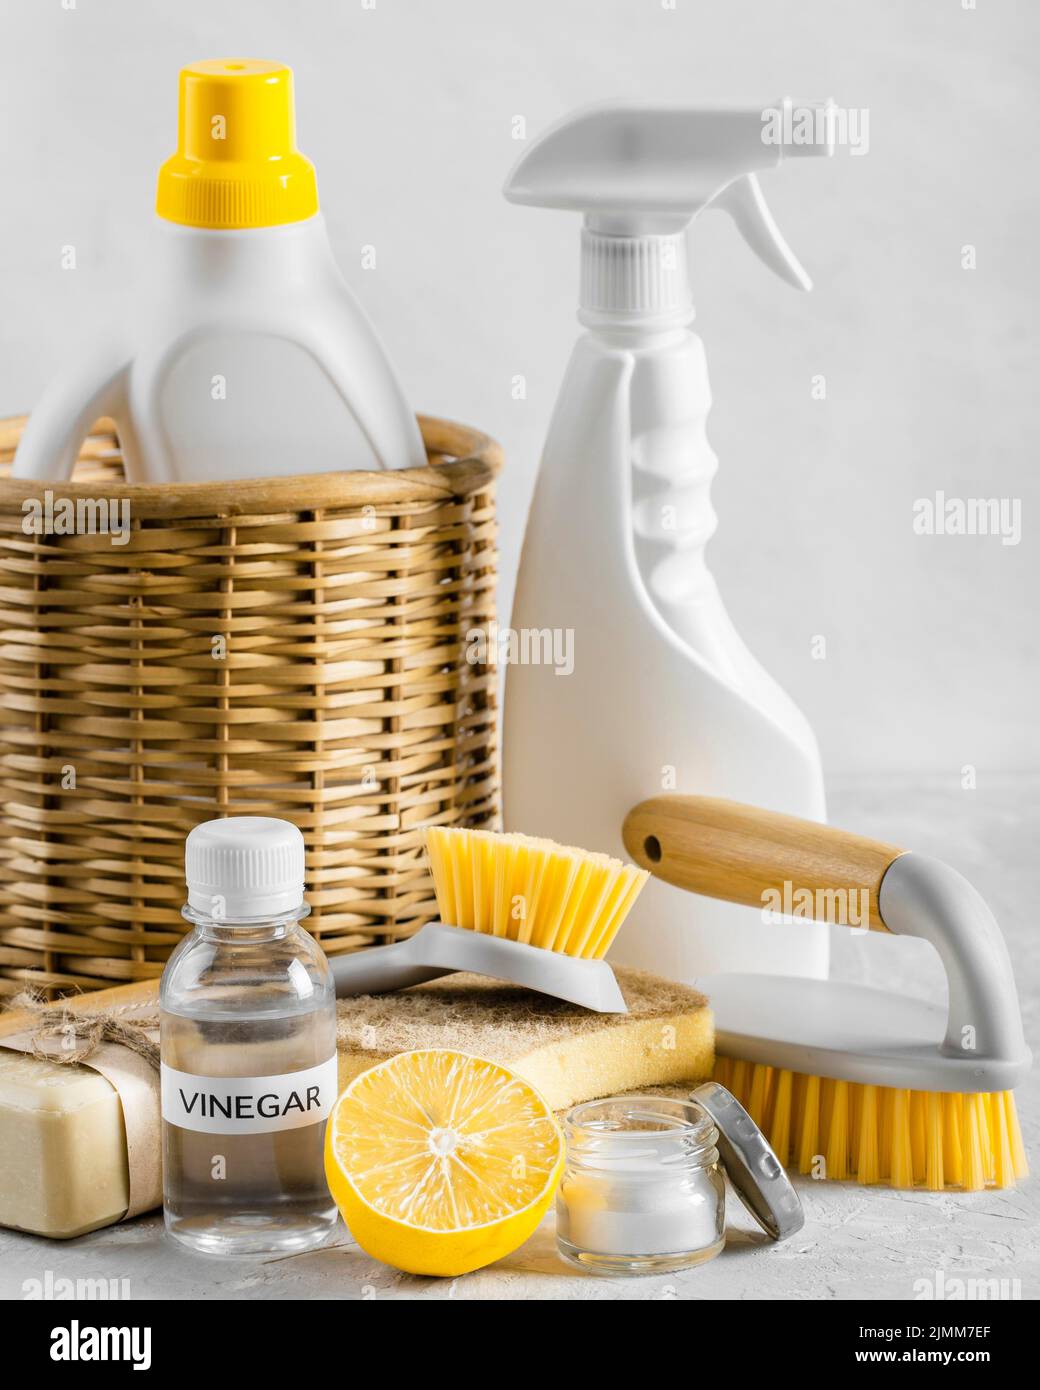 Front view eco friendly cleaning brushes basket with lemon vinegar Stock Photo